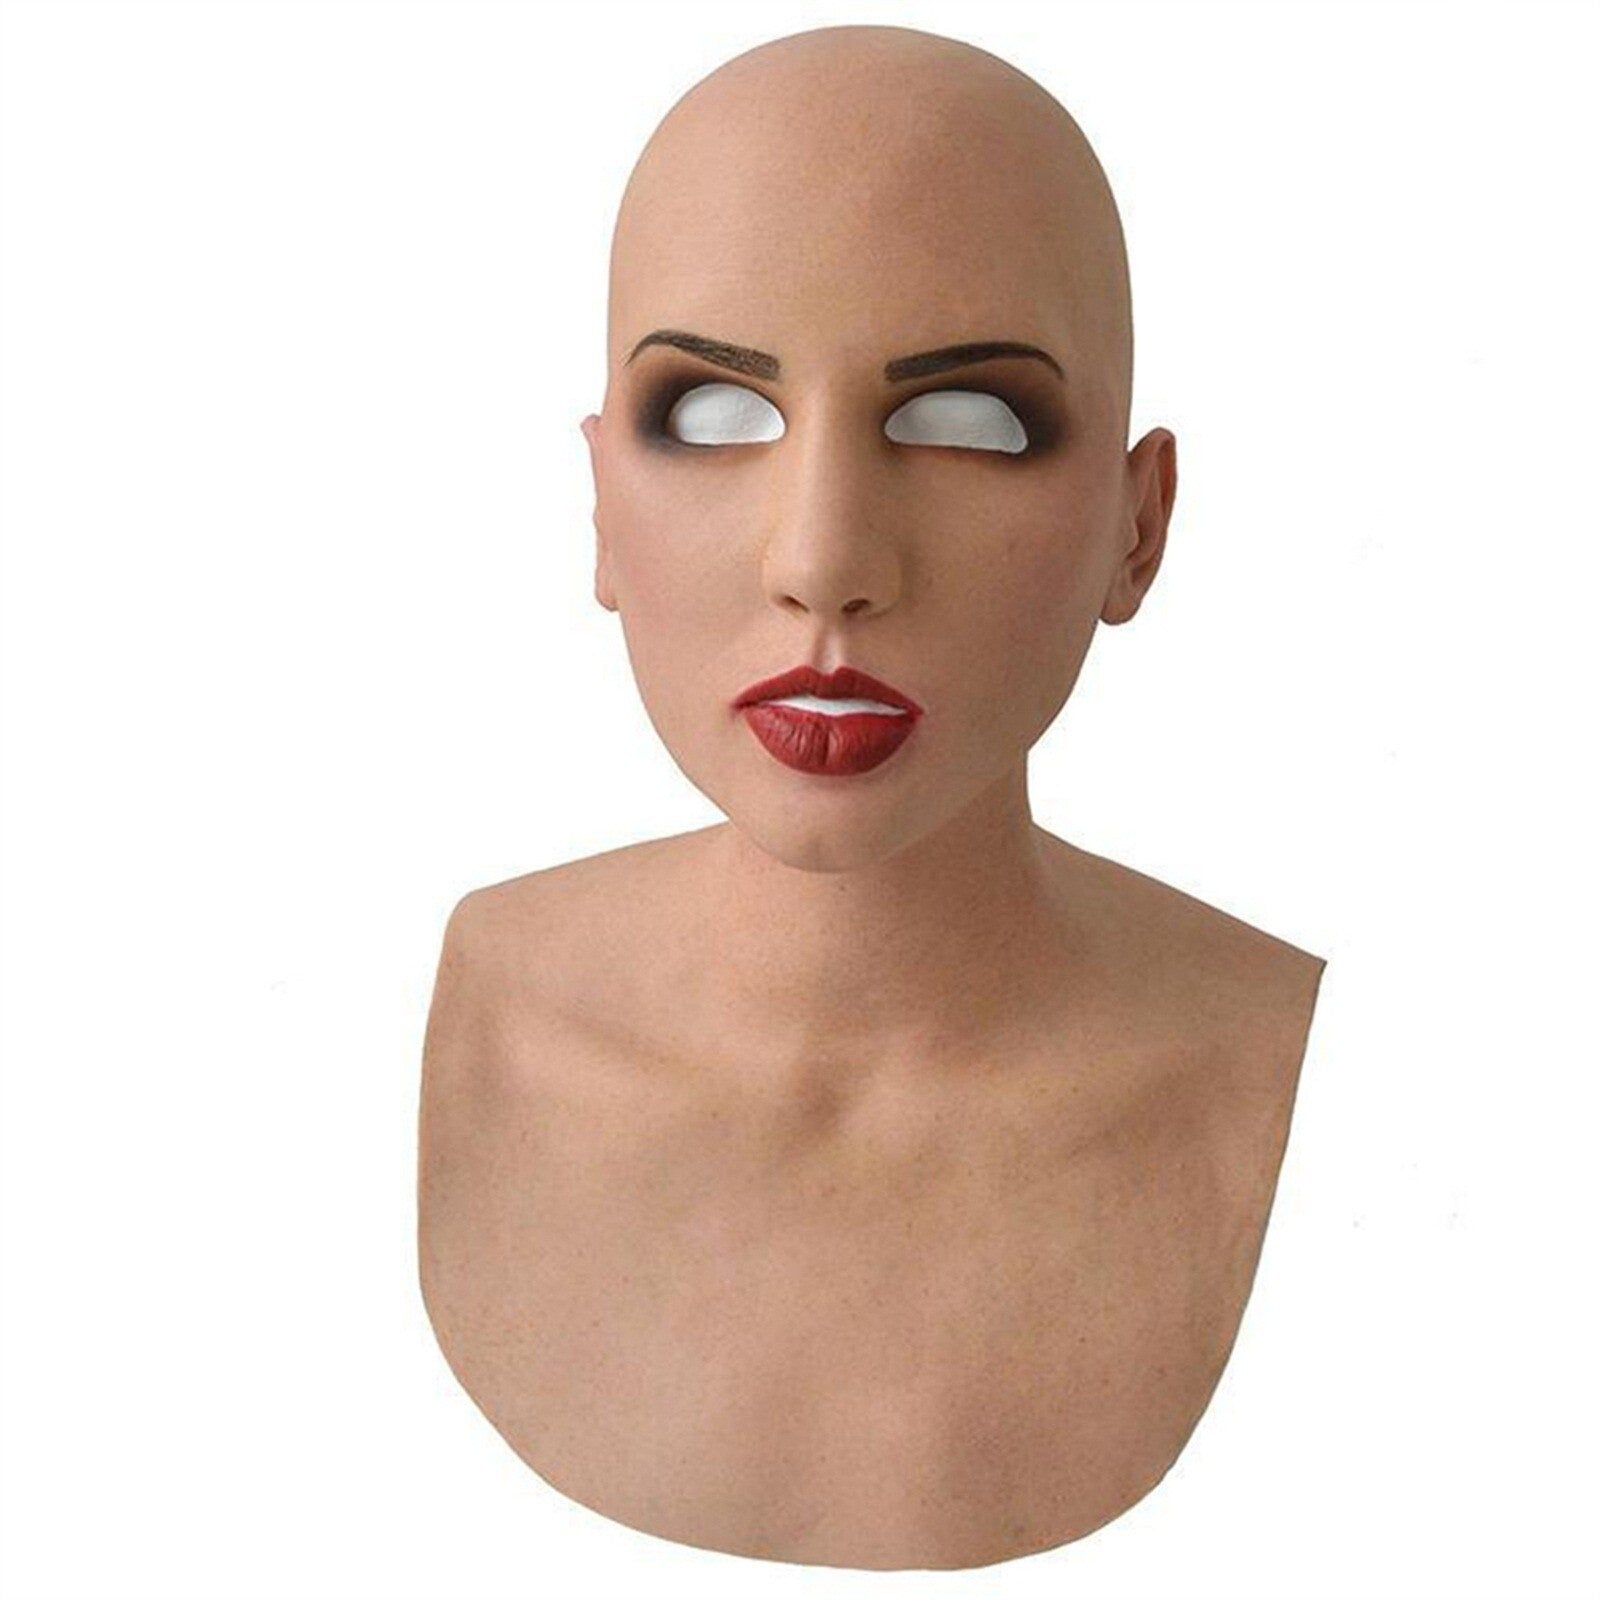 [SOLD OUT] Latex Real Face Mask